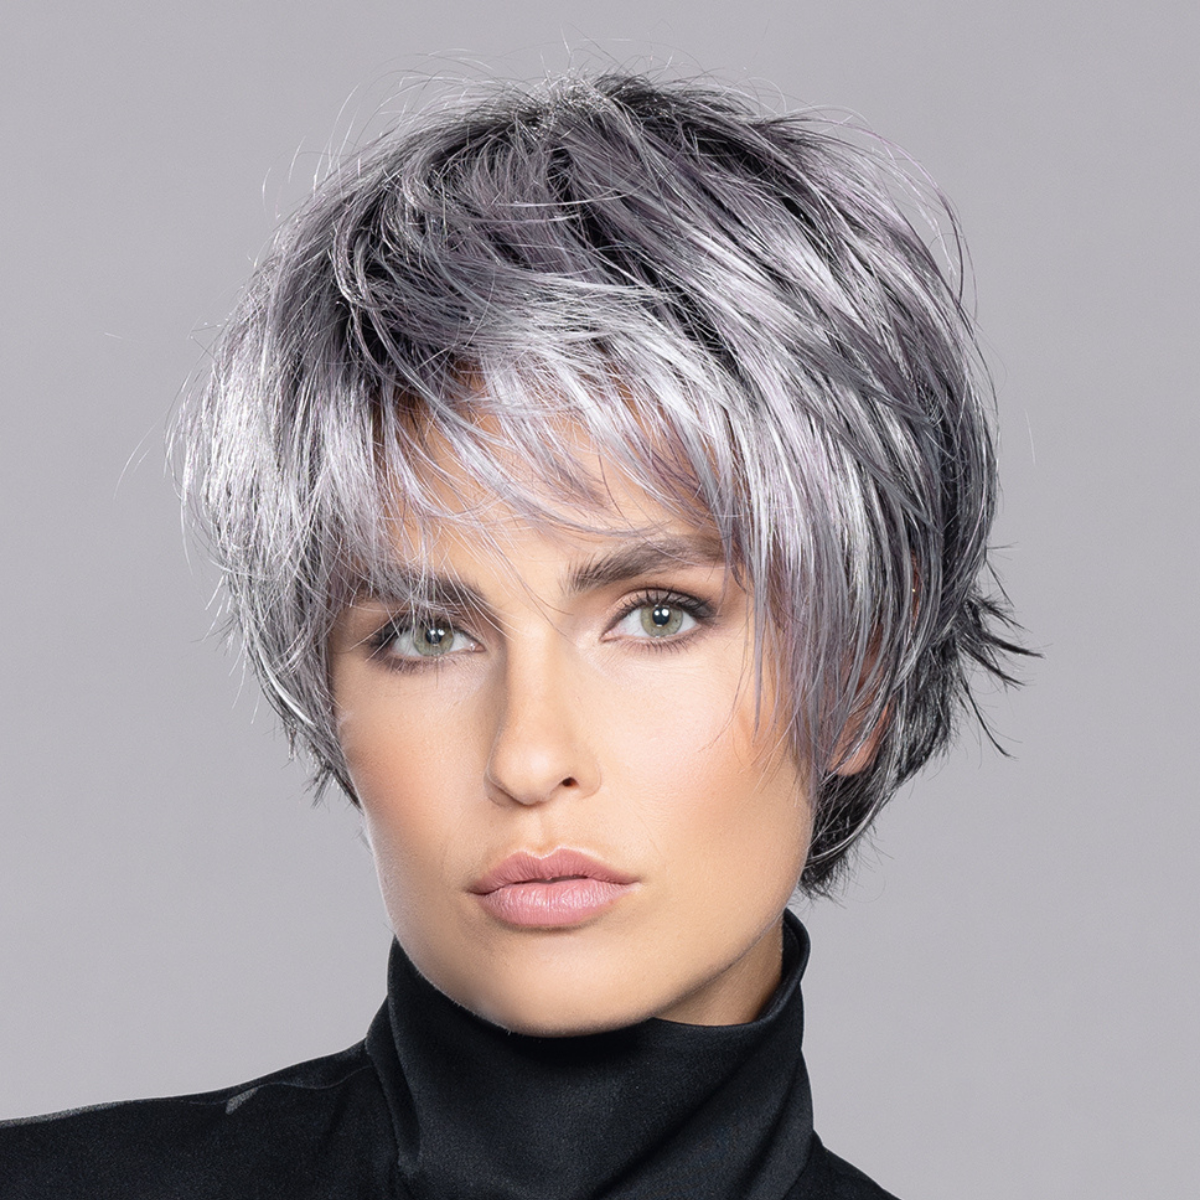 Sky - Hair Power Collection by Ellen Wille